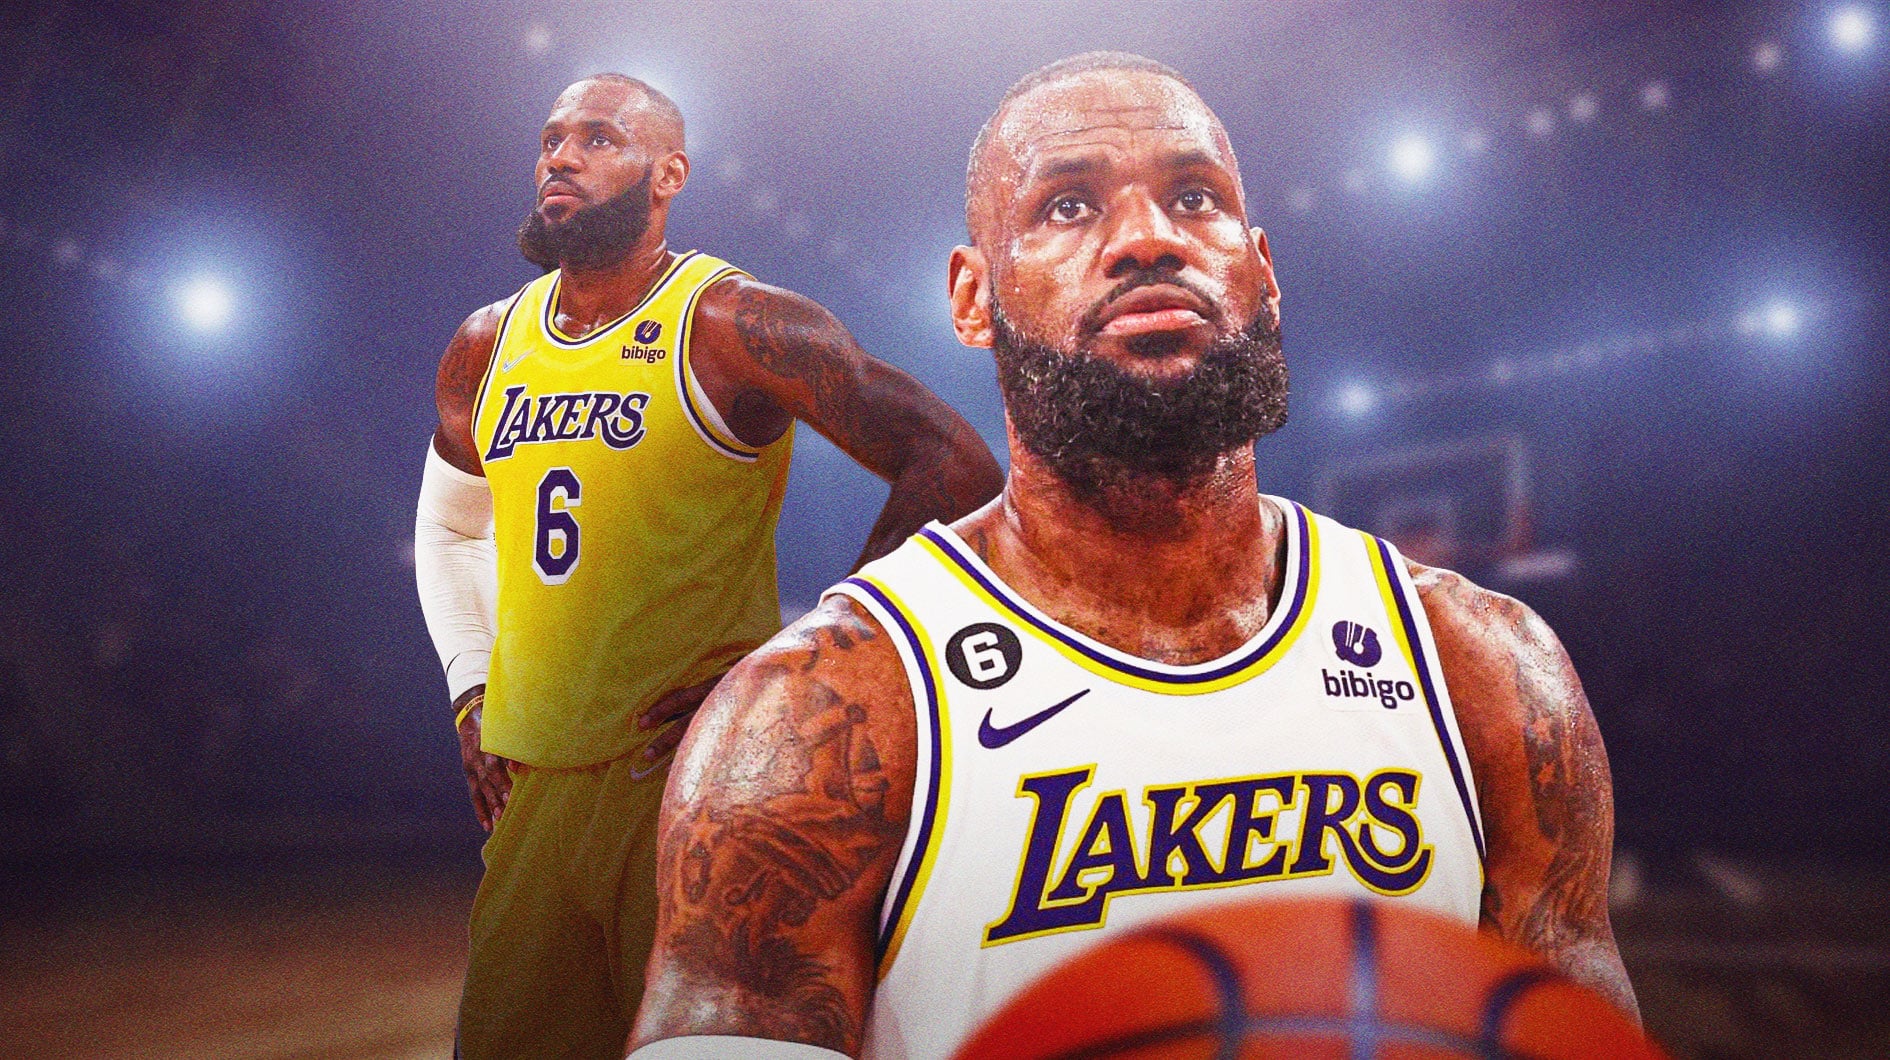 LeBron James shows love to Heat ahead of return with Lakers